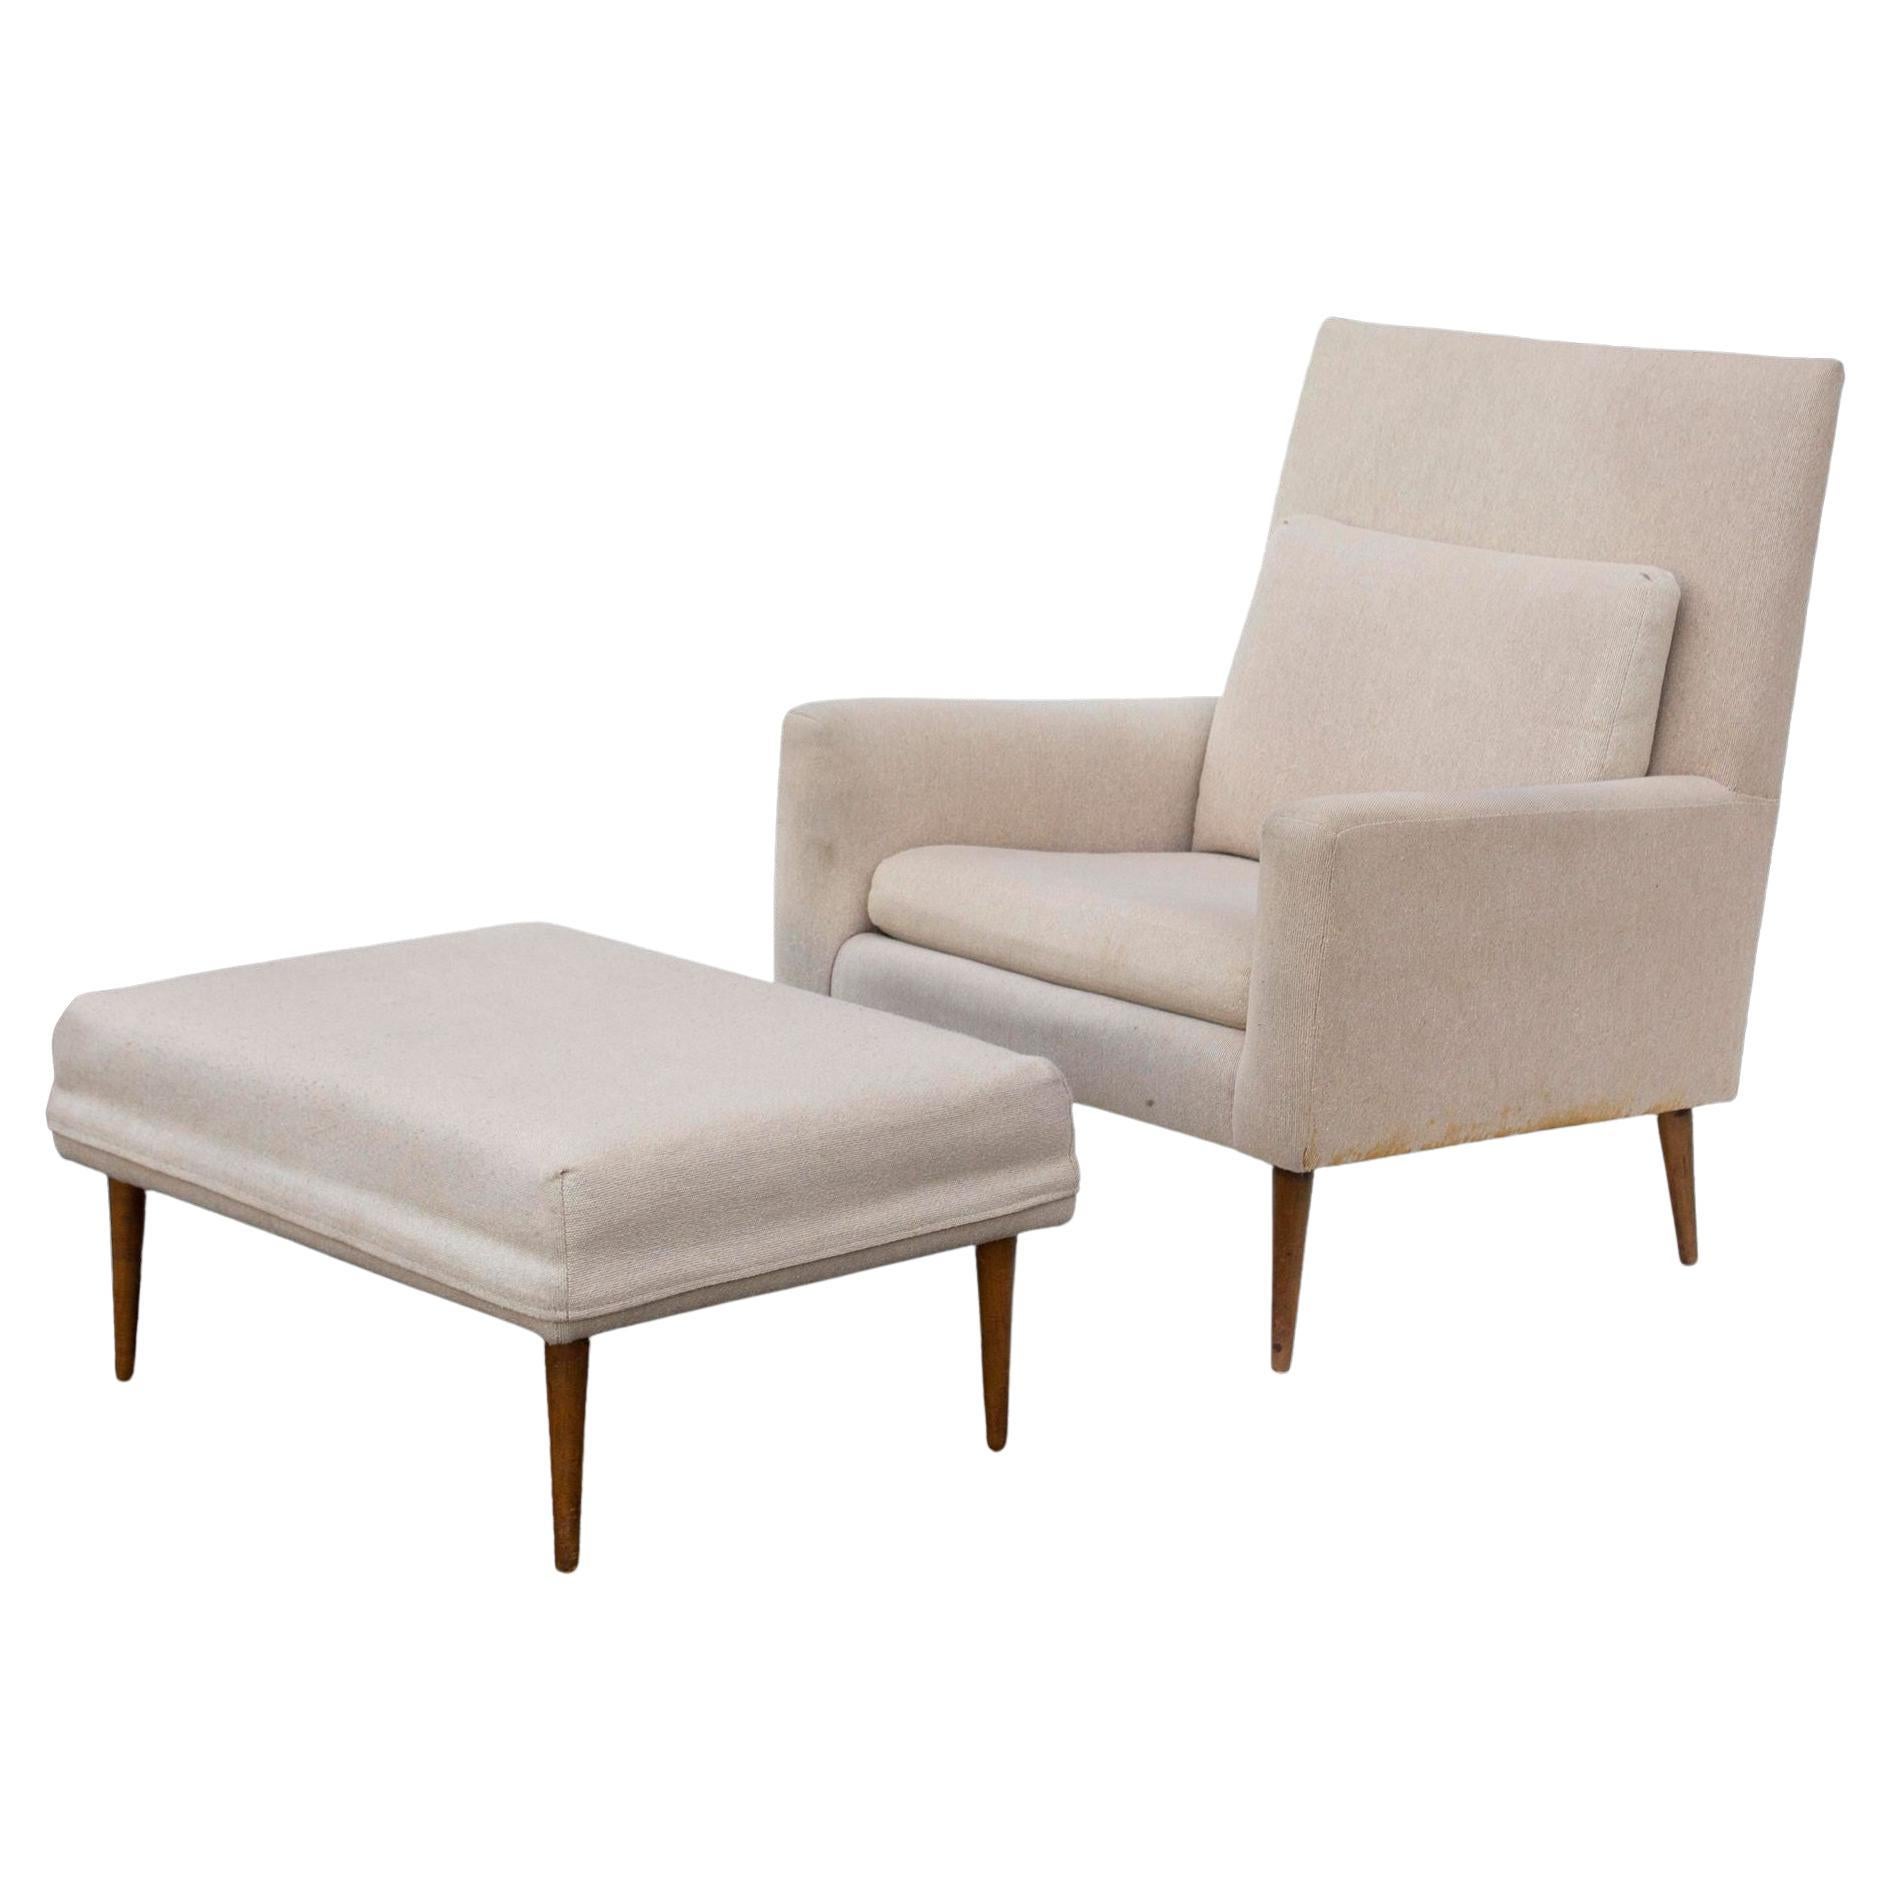 Paul McCobb Lounge Chair Model 302 and Matching Ottoman by Directional